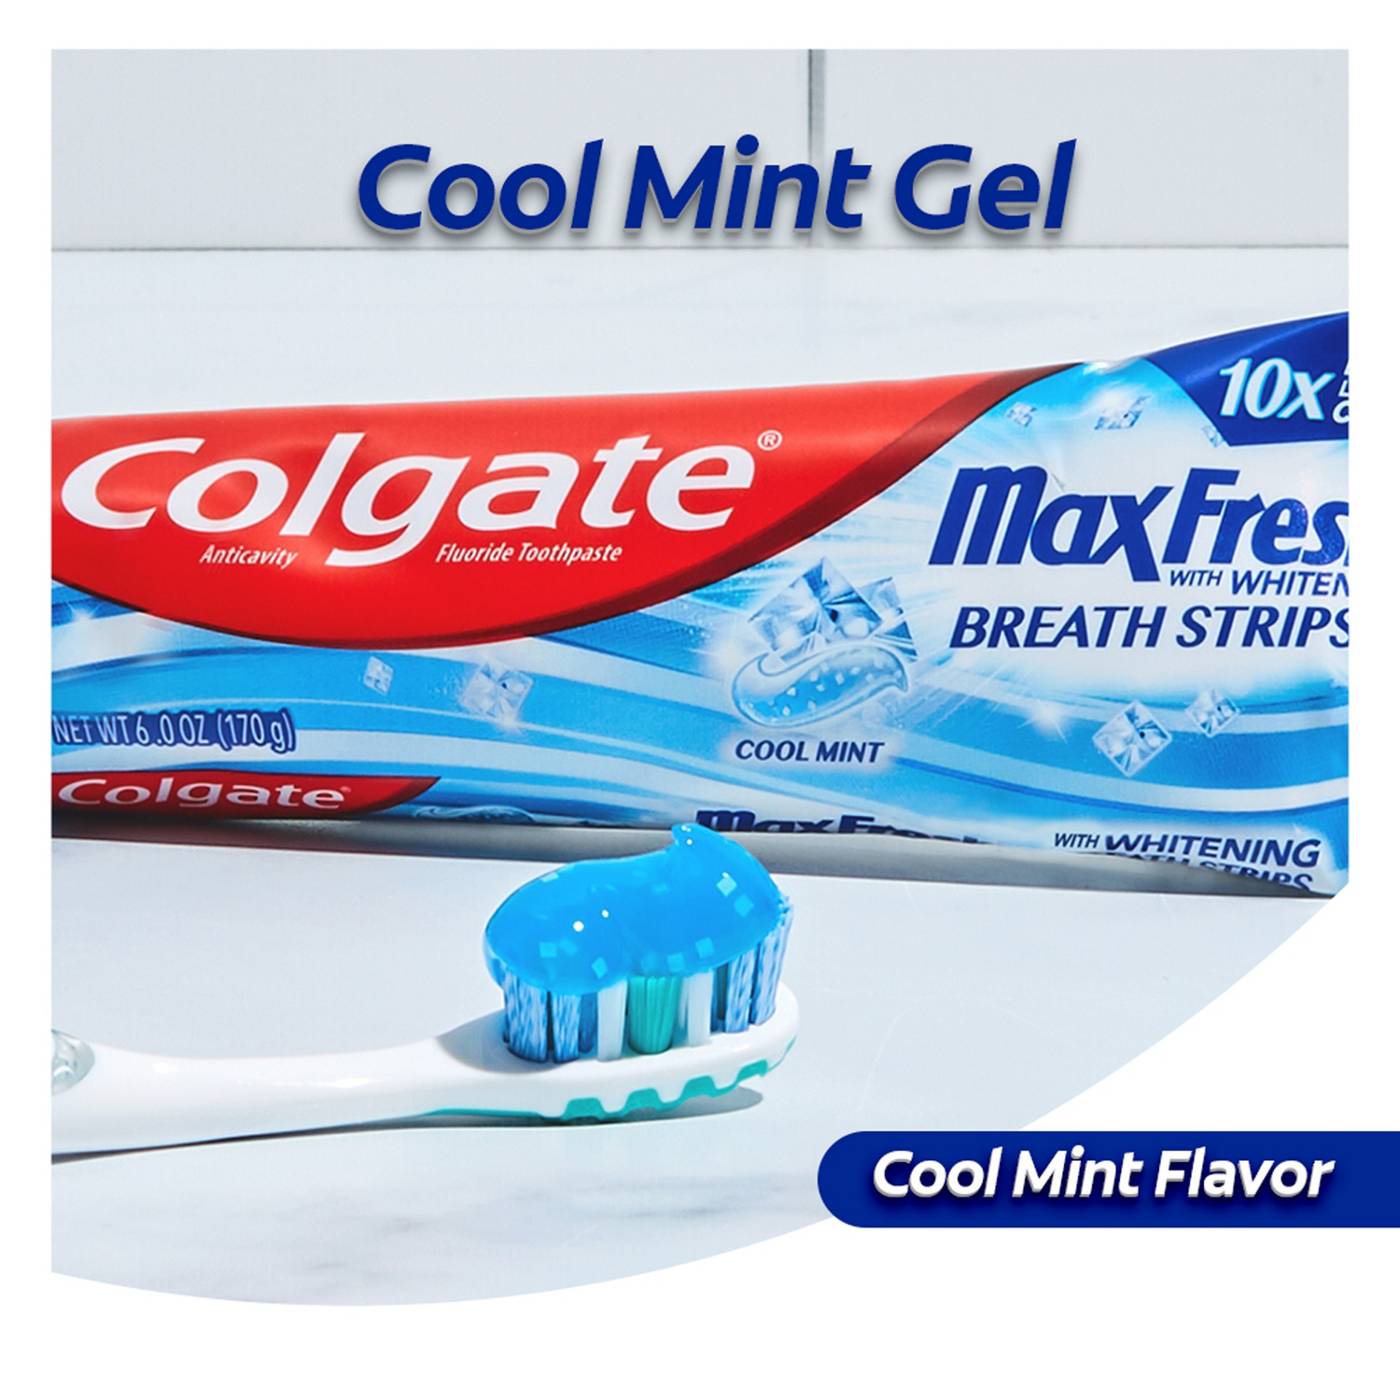 Colgate Max Fresh Anticavity Toothpaste - Cool Mint; image 9 of 15